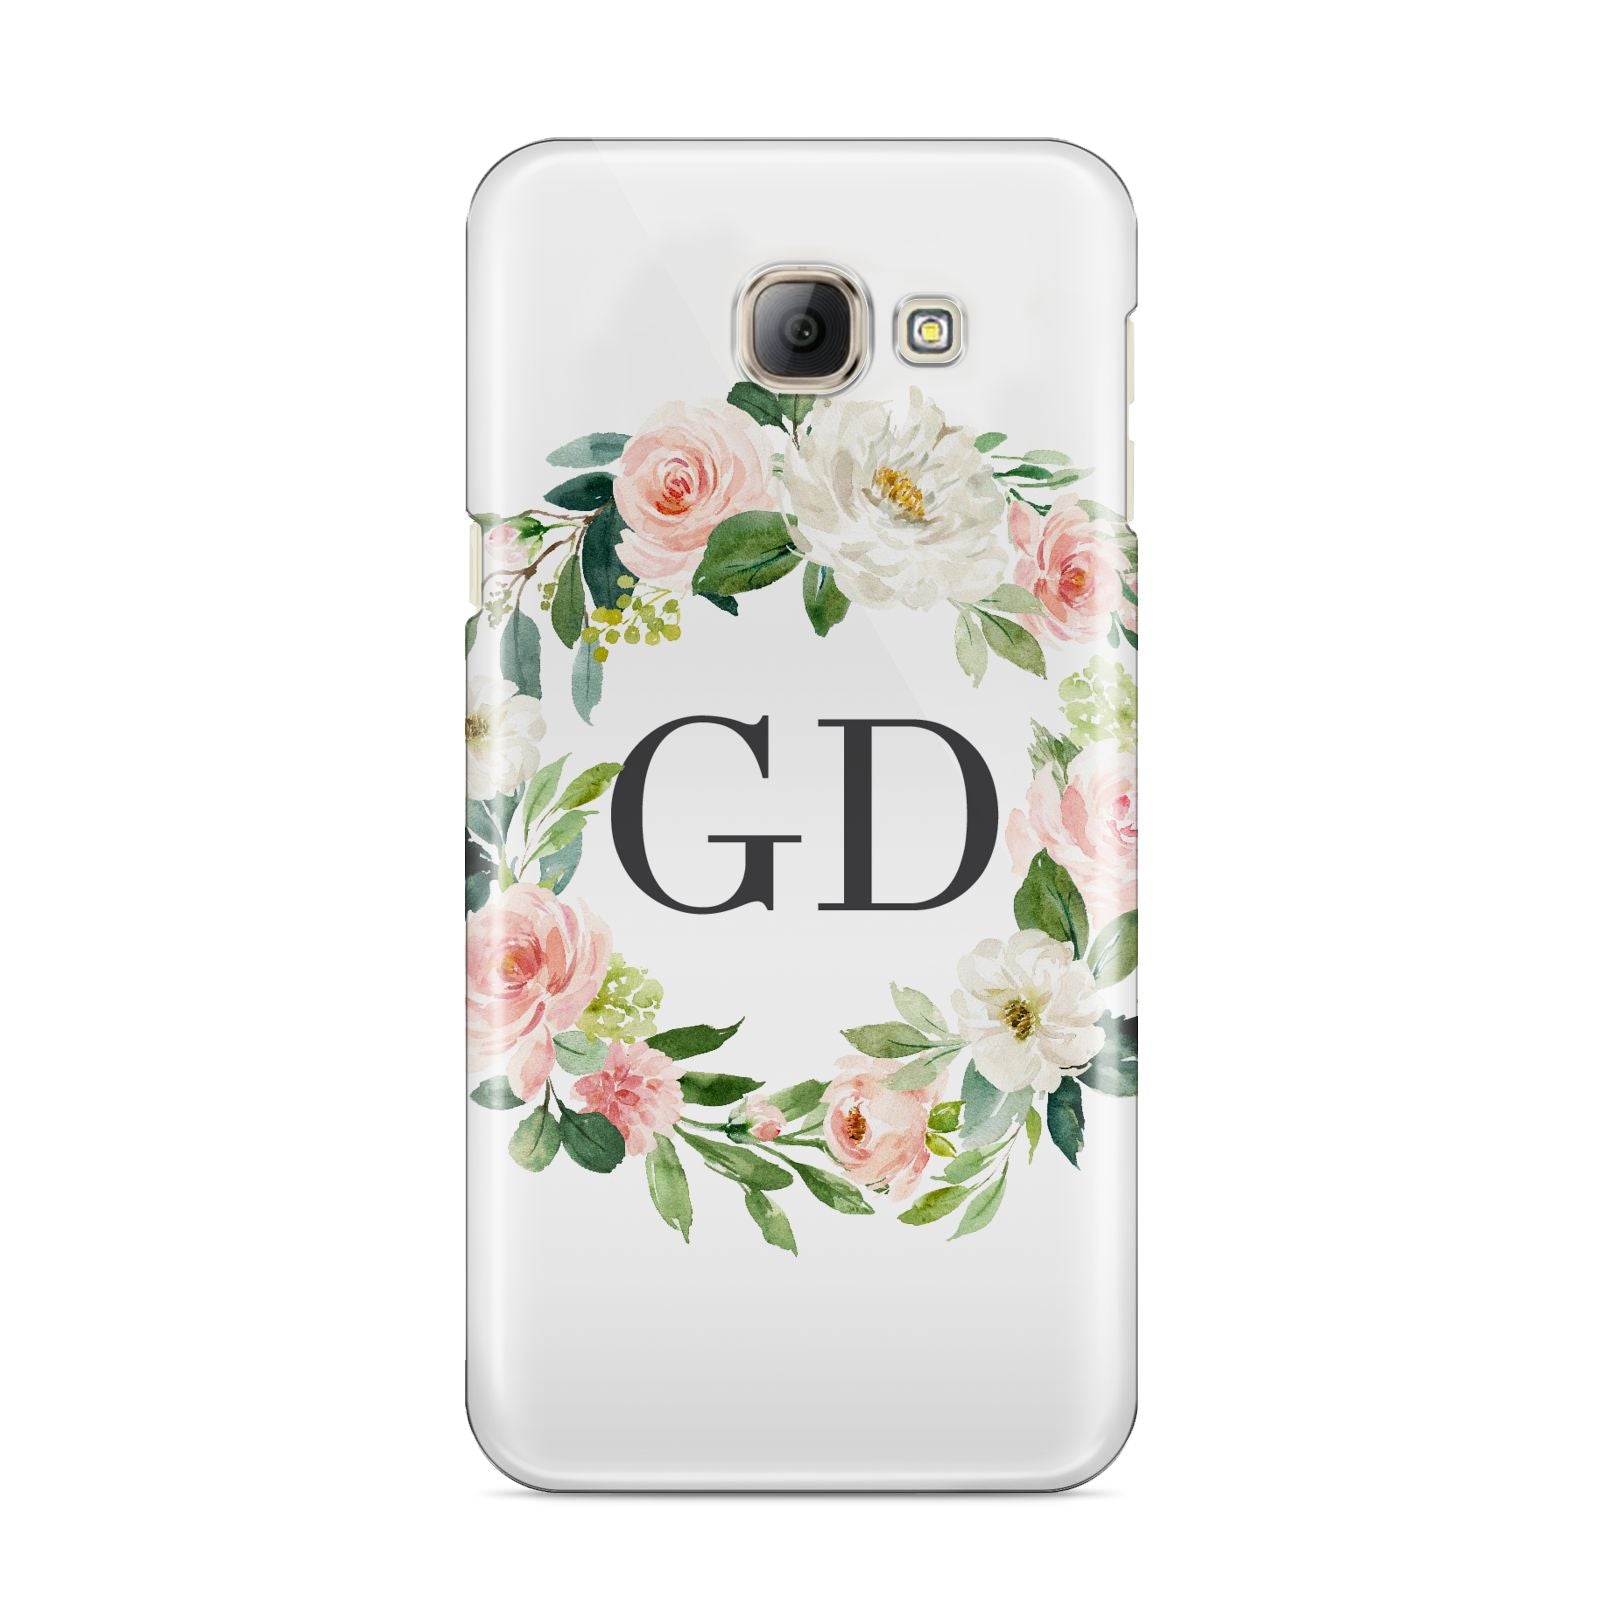 Personalised floral wreath Samsung Galaxy A8 2016 Case